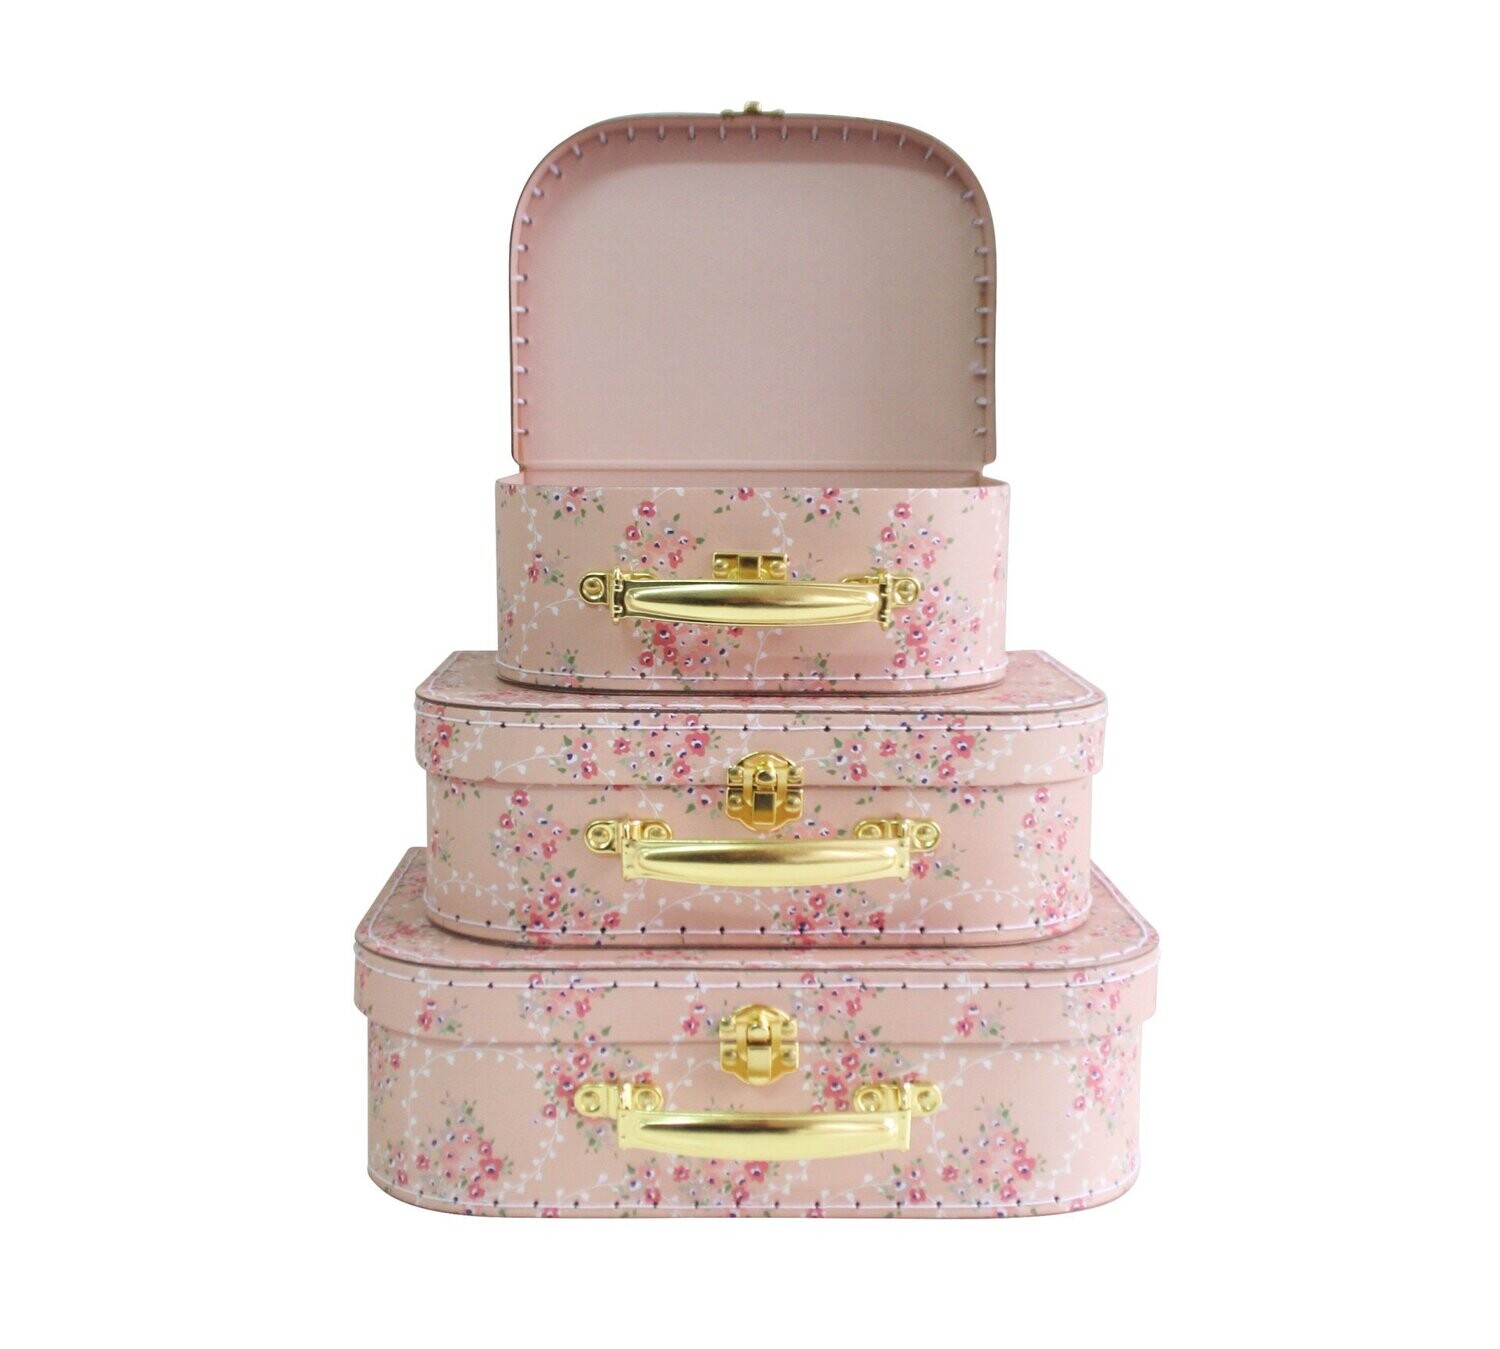 Alimrose Carry Case Pink Floral Wreath - Small